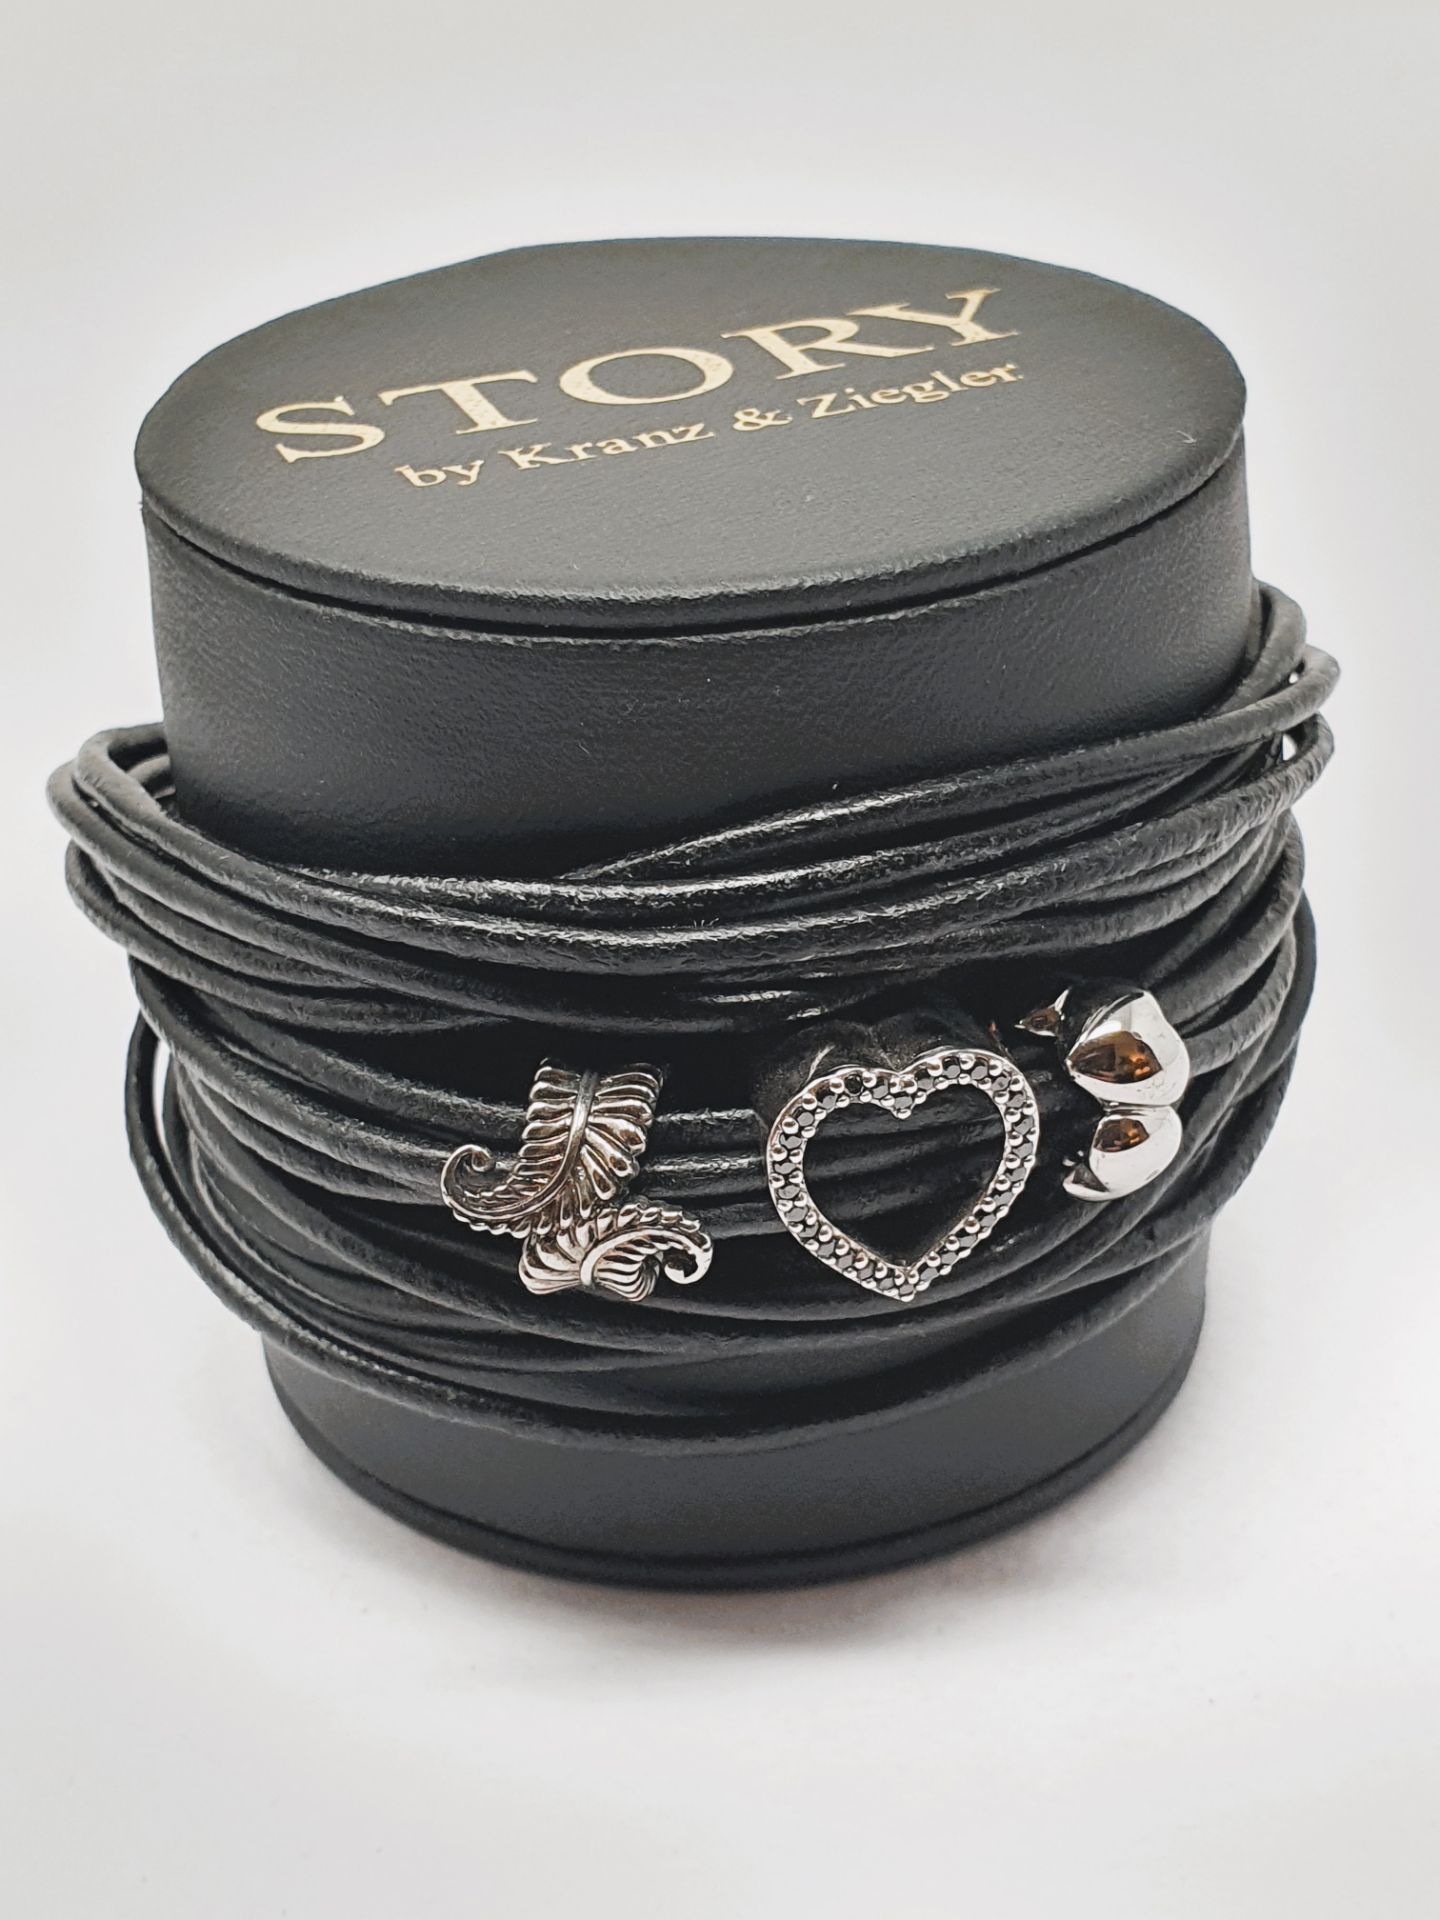 STORY' by Kranz & Ziegler black leather wrap bracelet with rose gold vermeil sterling silver - Image 2 of 3